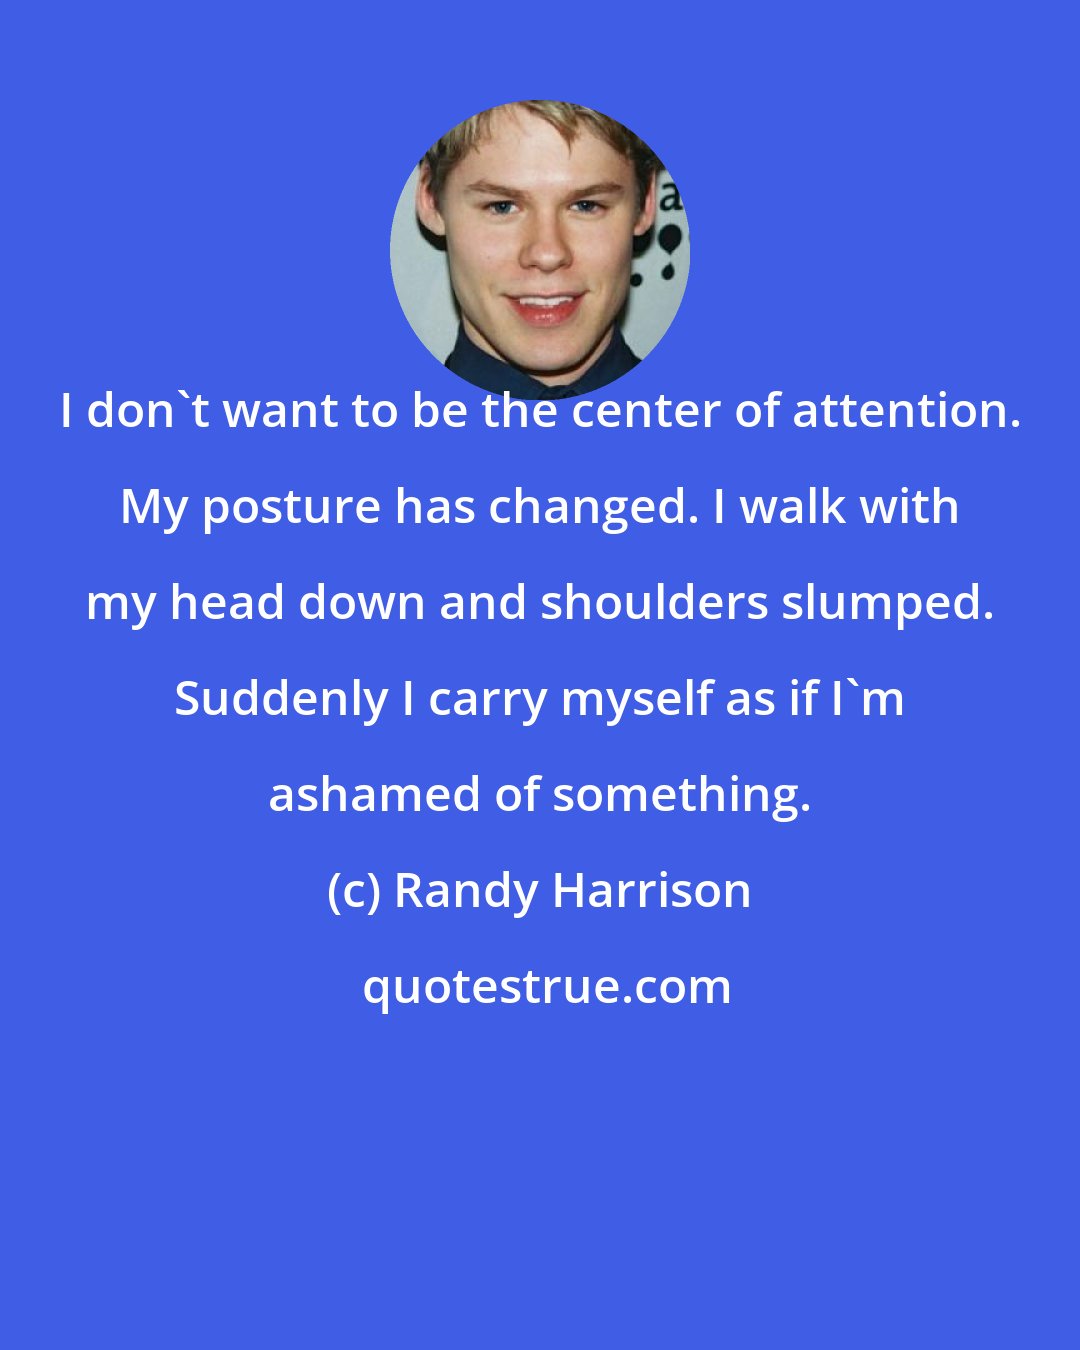 Randy Harrison: I don't want to be the center of attention. My posture has changed. I walk with my head down and shoulders slumped. Suddenly I carry myself as if I'm ashamed of something.